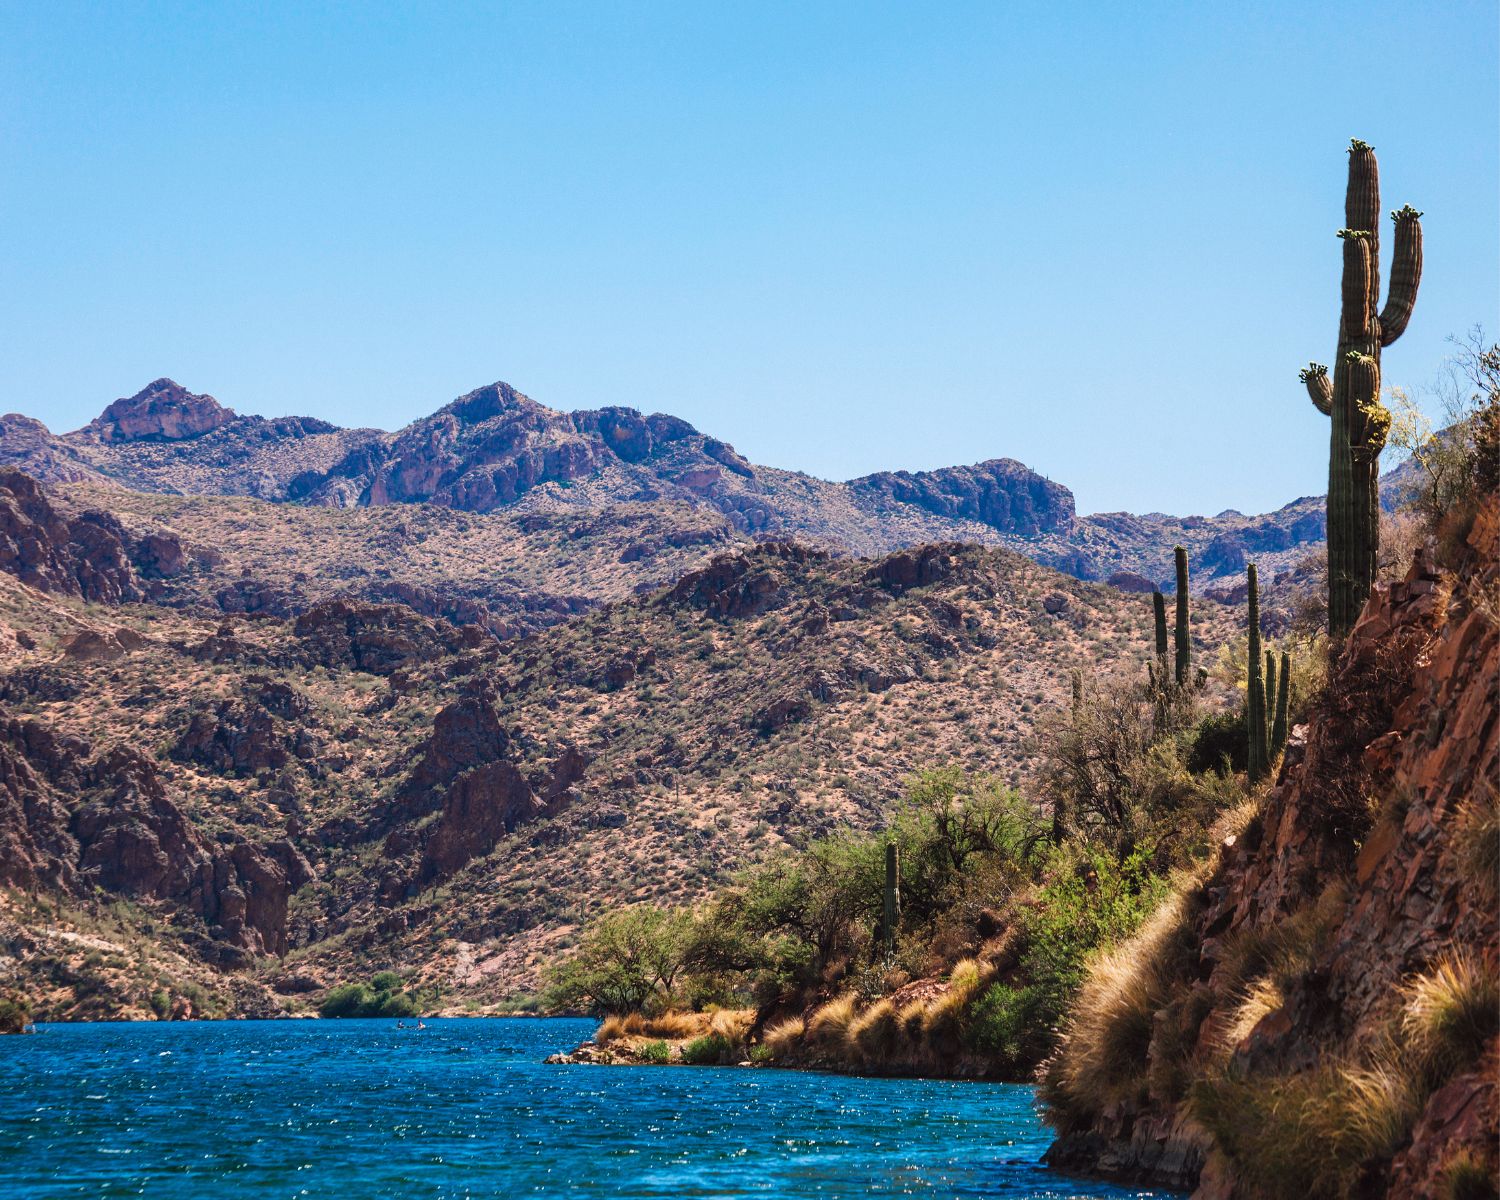 Arizona lake is surrounded by rocky hills and some cacti. 